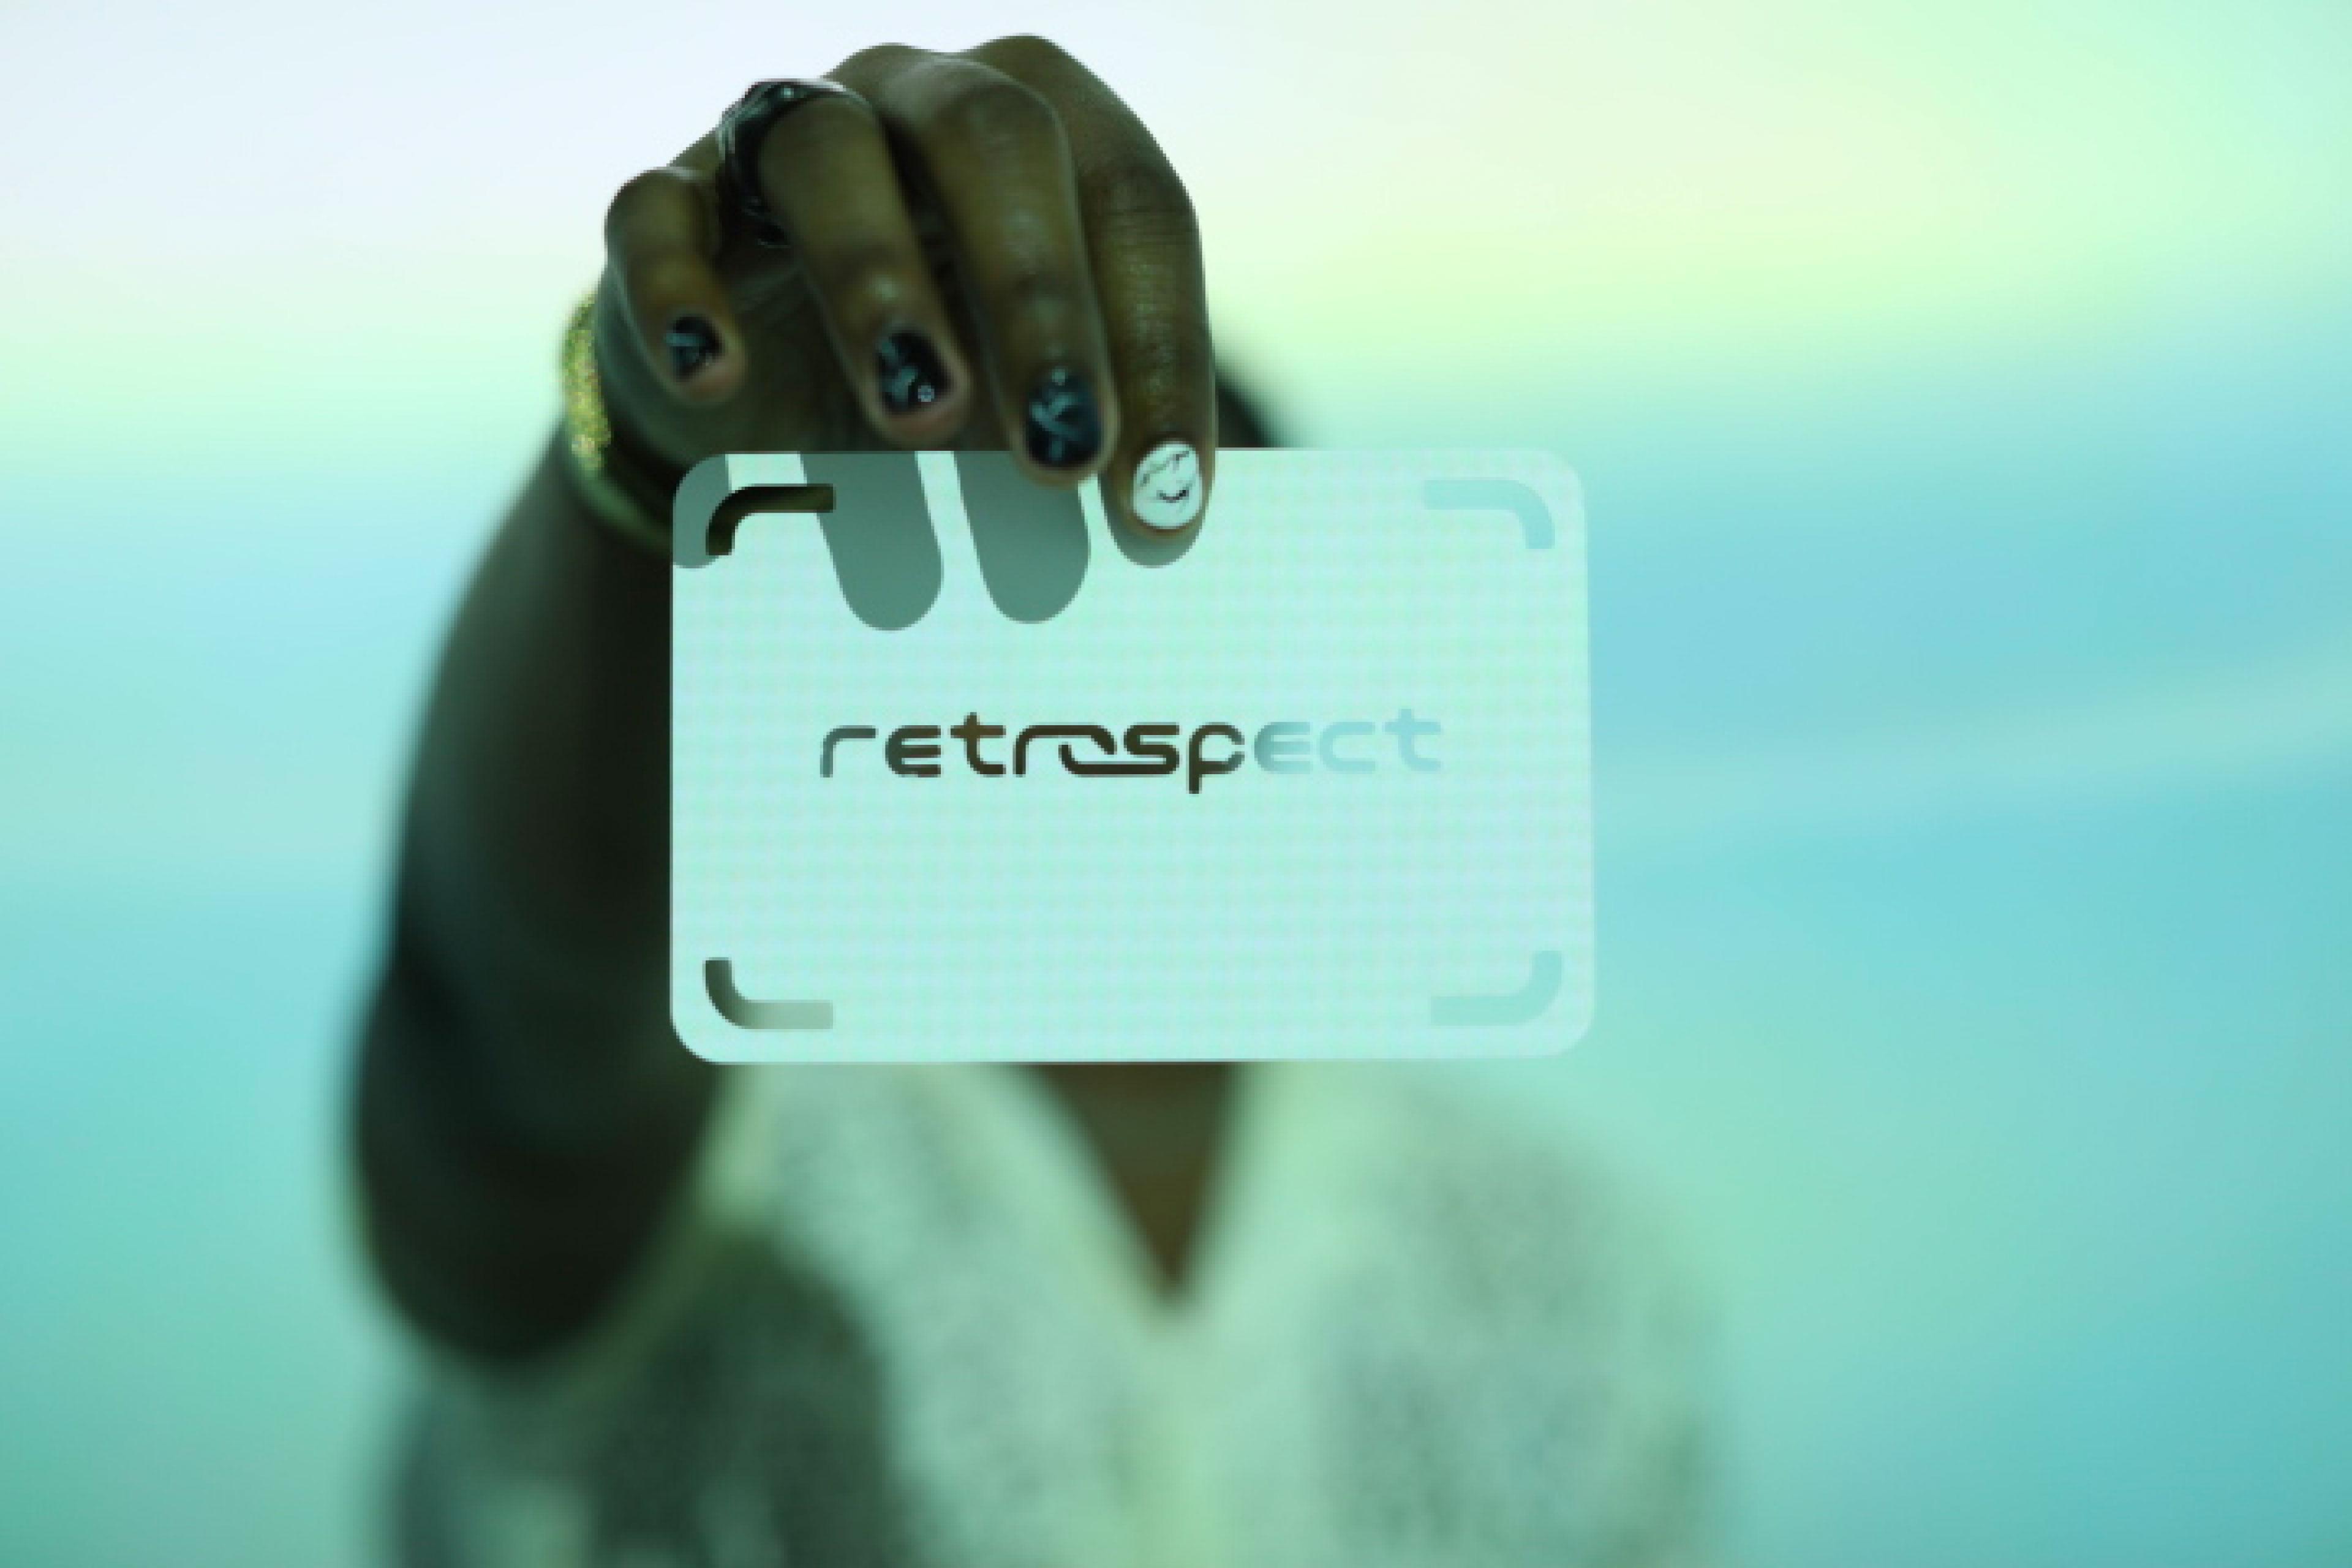 Co-founder holding cut out of the Retrospect logo